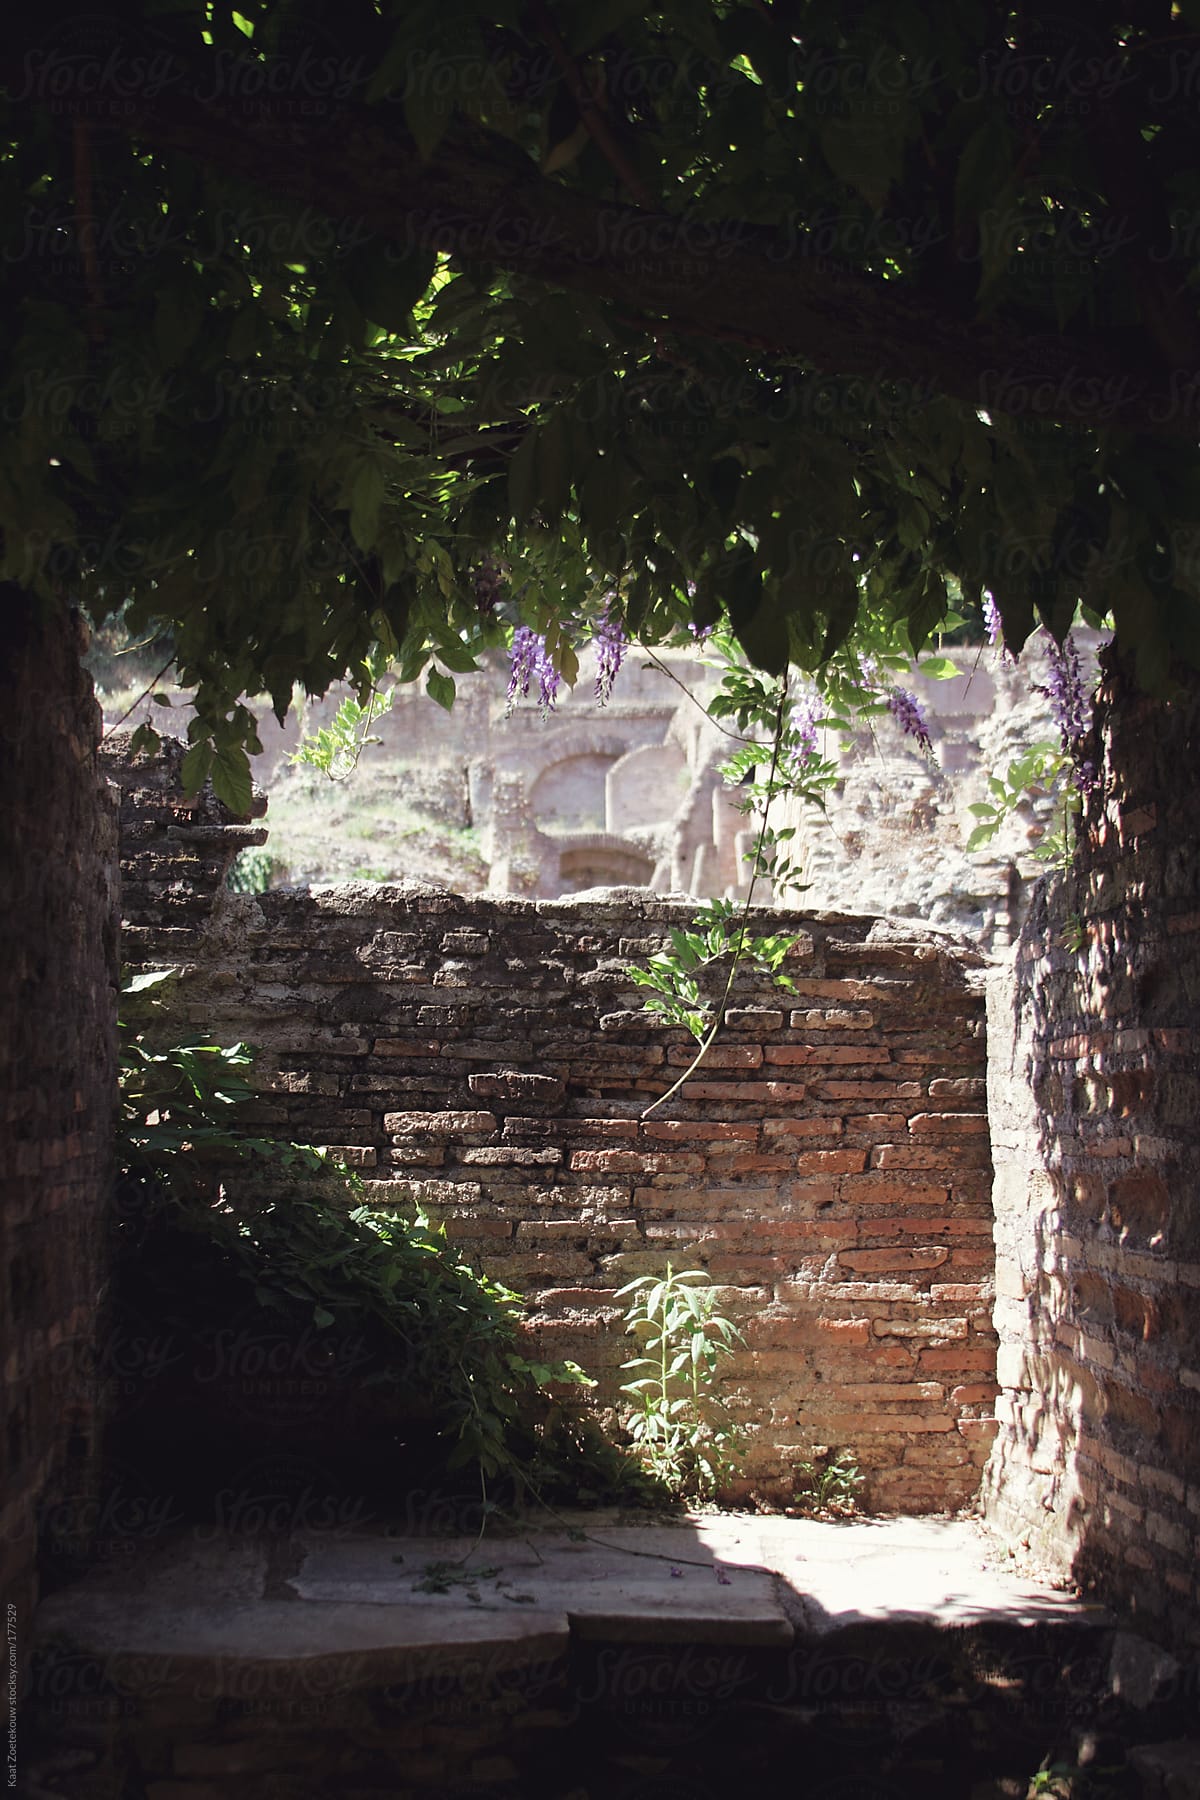 A sunlit spot, hidden away beneath blooming wisteria, found in the Forum Romanum ancient structures in Rome.